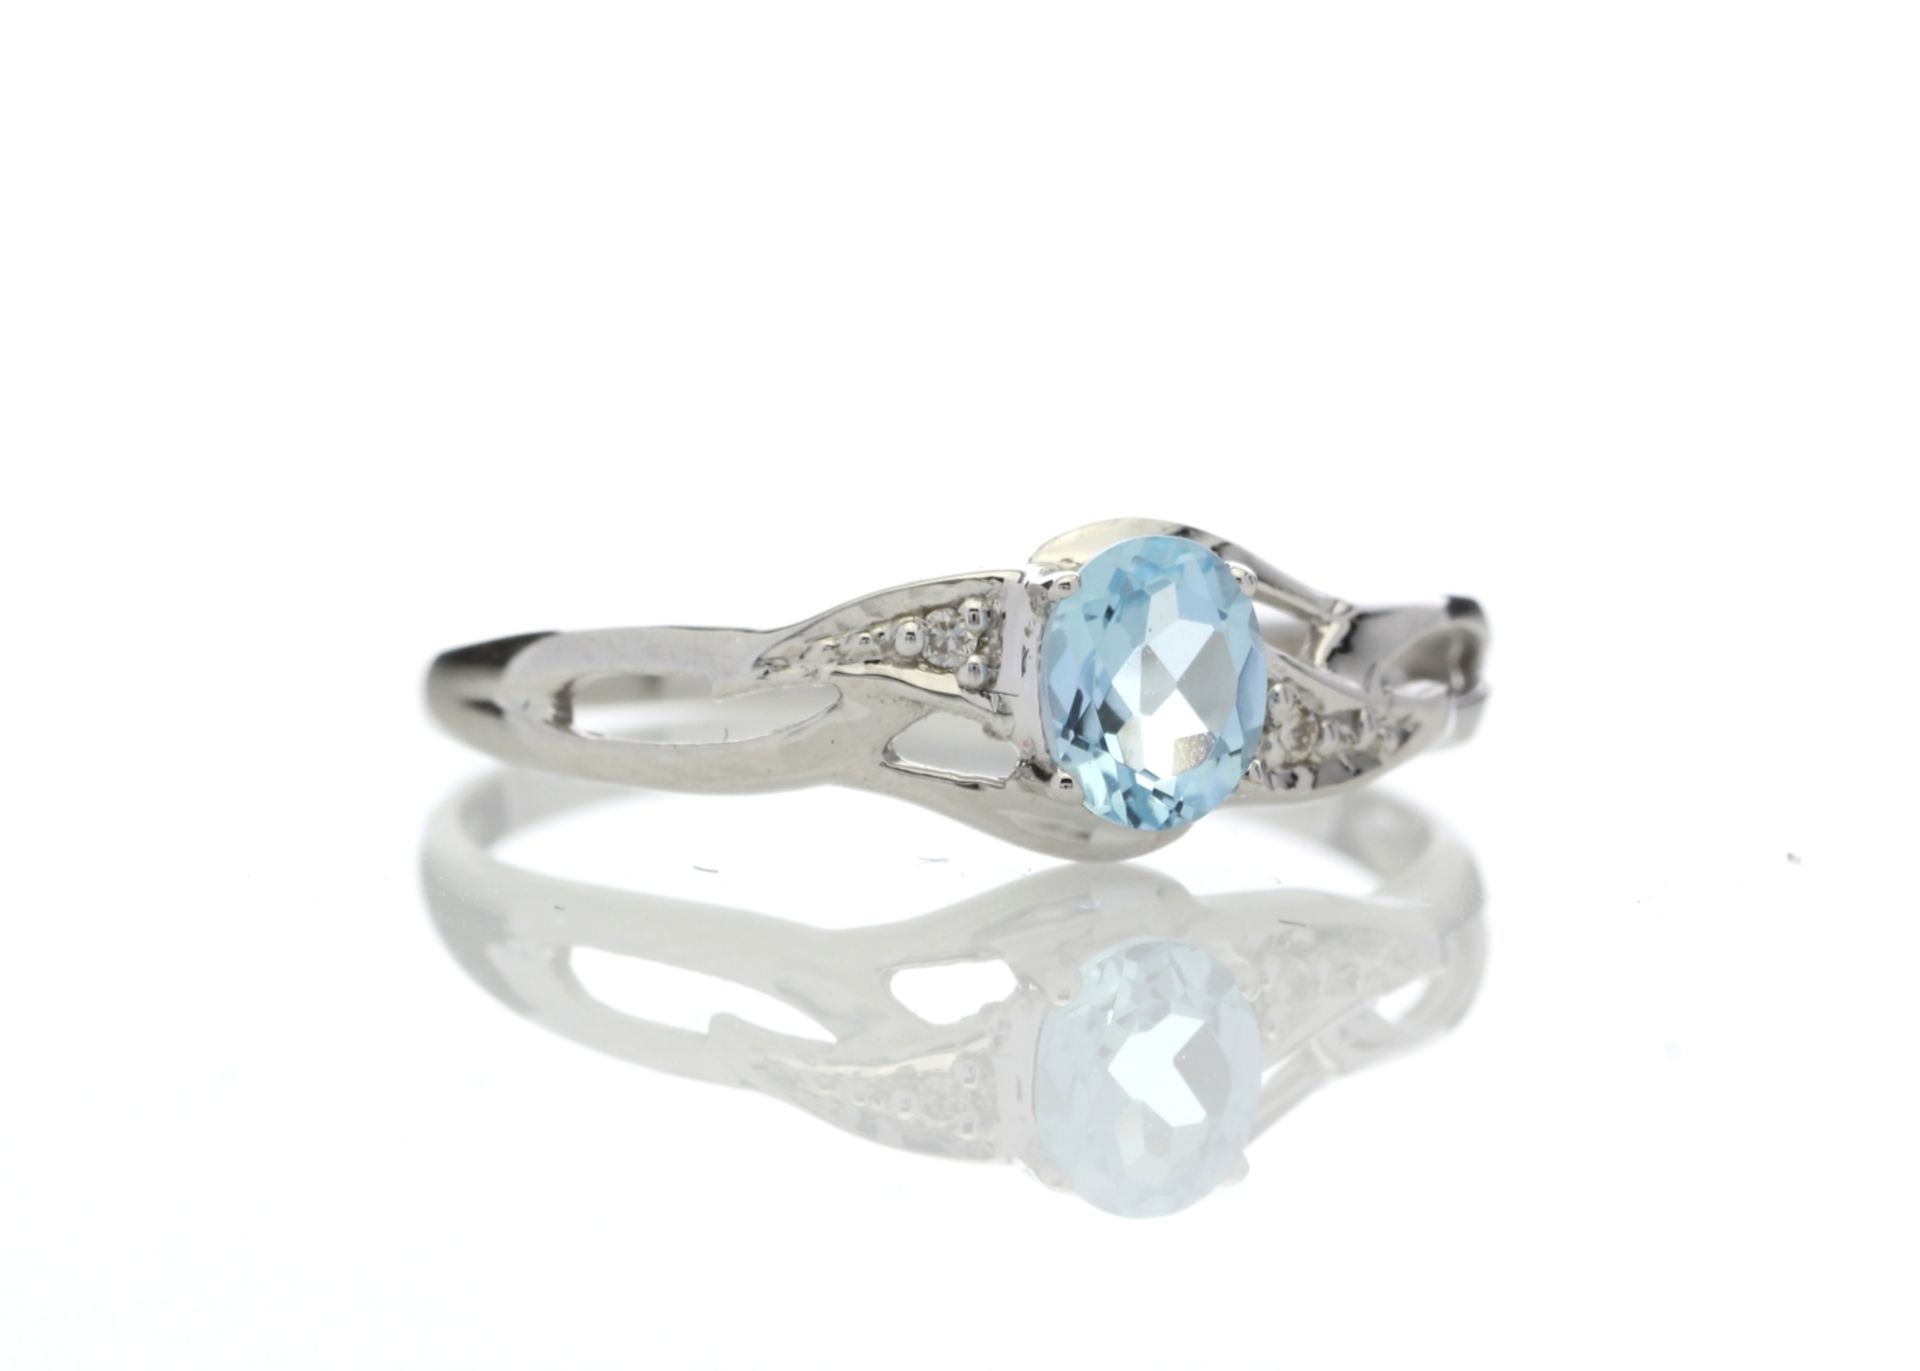 9ct White Gold Fancy Cluster Diamond And Blue Topaz Ring 0.01 Carats - Valued by GIE £609.00 - 9ct - Image 4 of 5